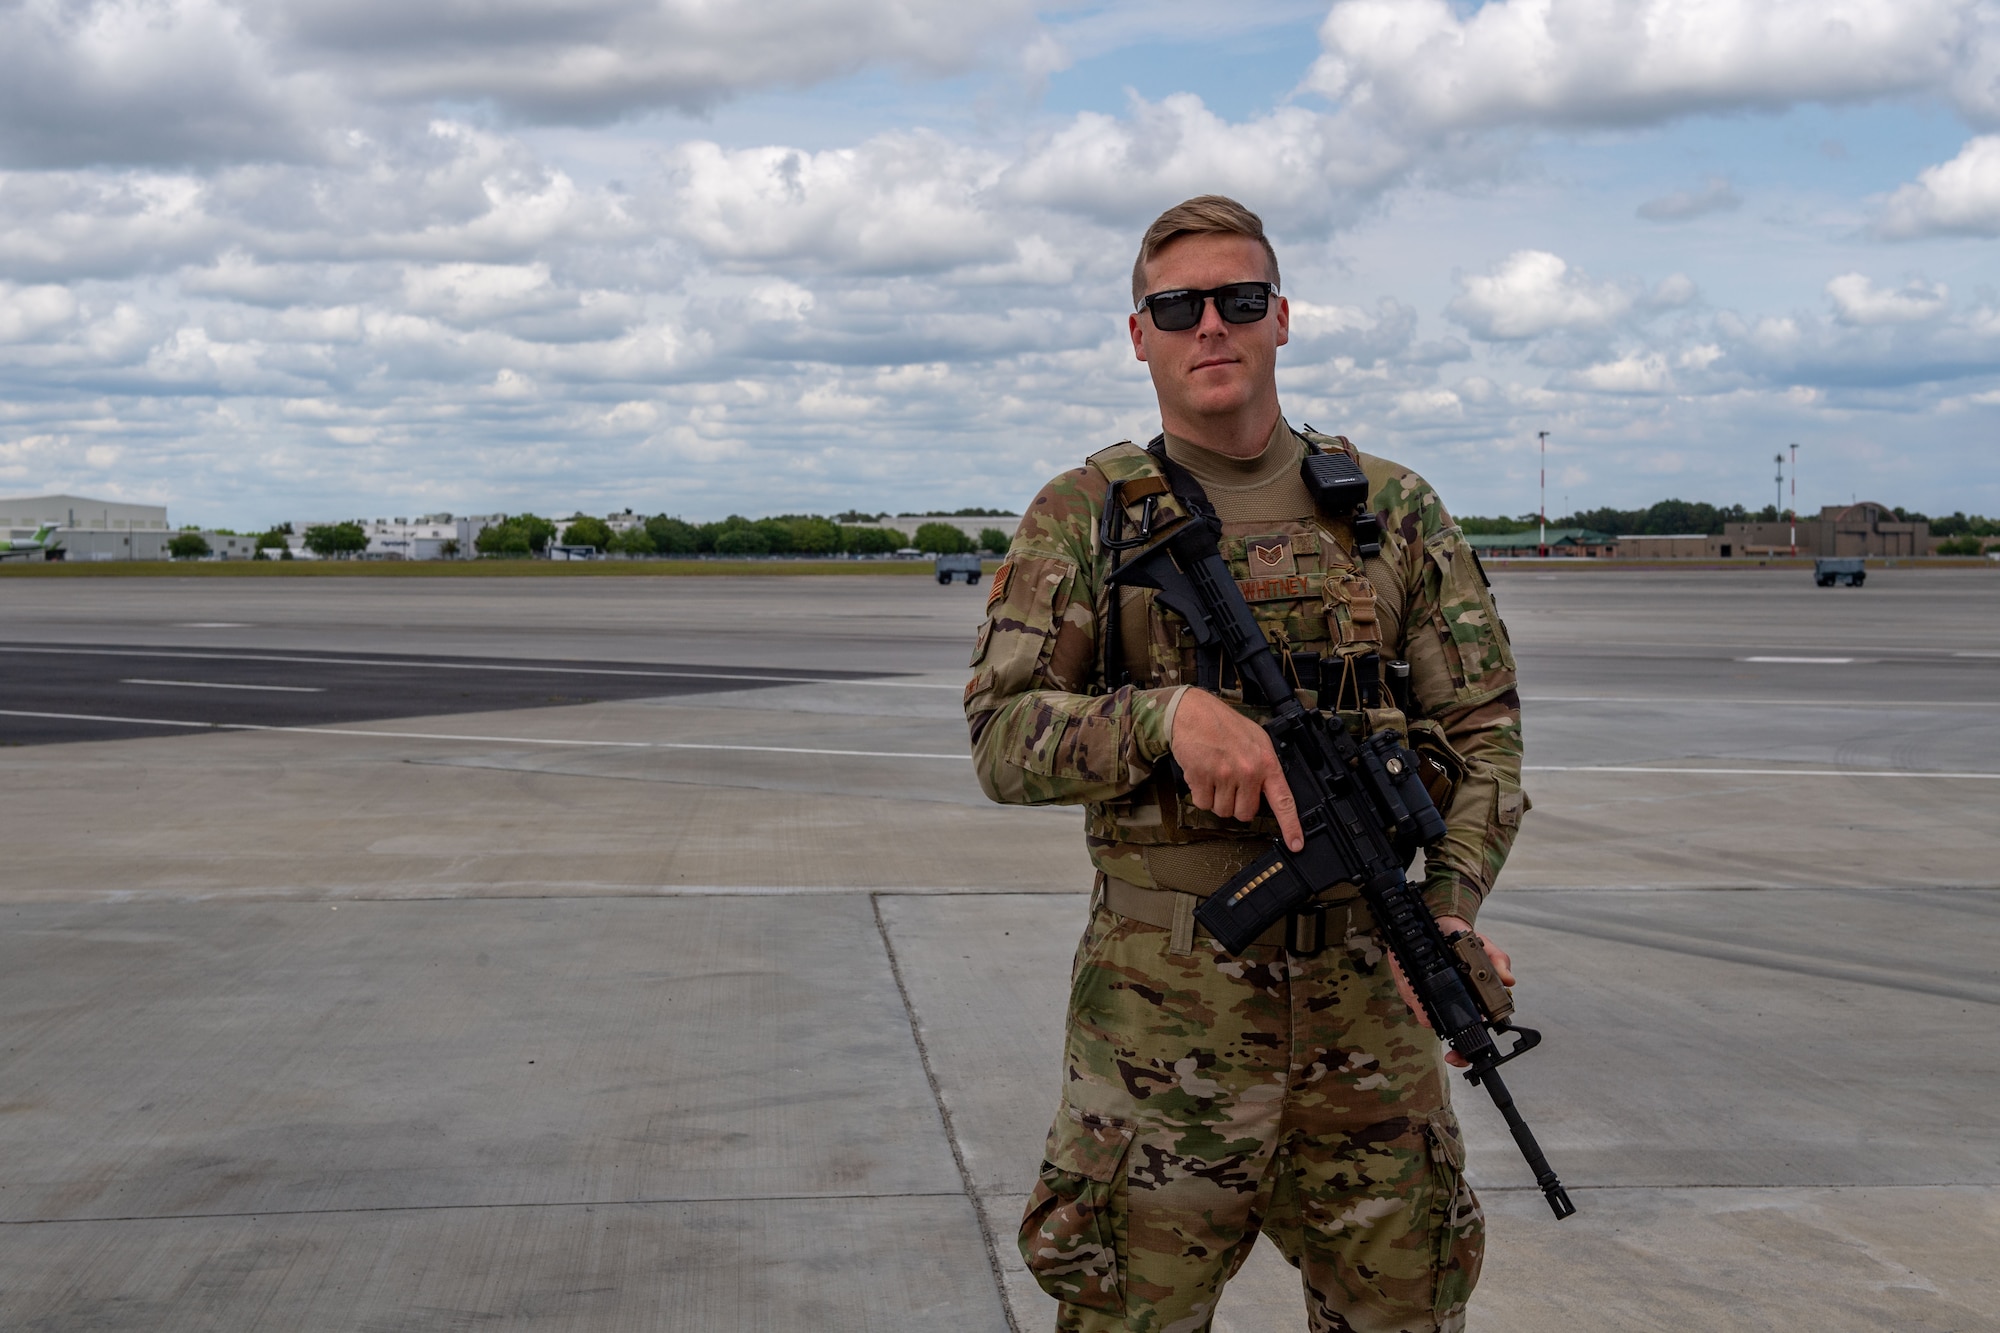 U.S. Air Force Staff Sgt. Samuel Whitney, 23rd Security Forces Squadron noncommissioned officer in charge of training, guards the flight line during exercise Ready Tiger 24-1 at Savannah Air National Guard Base, Georgia, April 9, 2024. During Ready Tiger 24-1, the 23rd Wing will be evaluated on the integration of Air Force Force Generation principles such as Agile Combat Employment, integrated combat turns, forward aerial refueling points, multi-capable Airmen, and combat search and rescue capabilities. (U.S. Air Force photo by Senior Airman Courtney Sebastianelli)